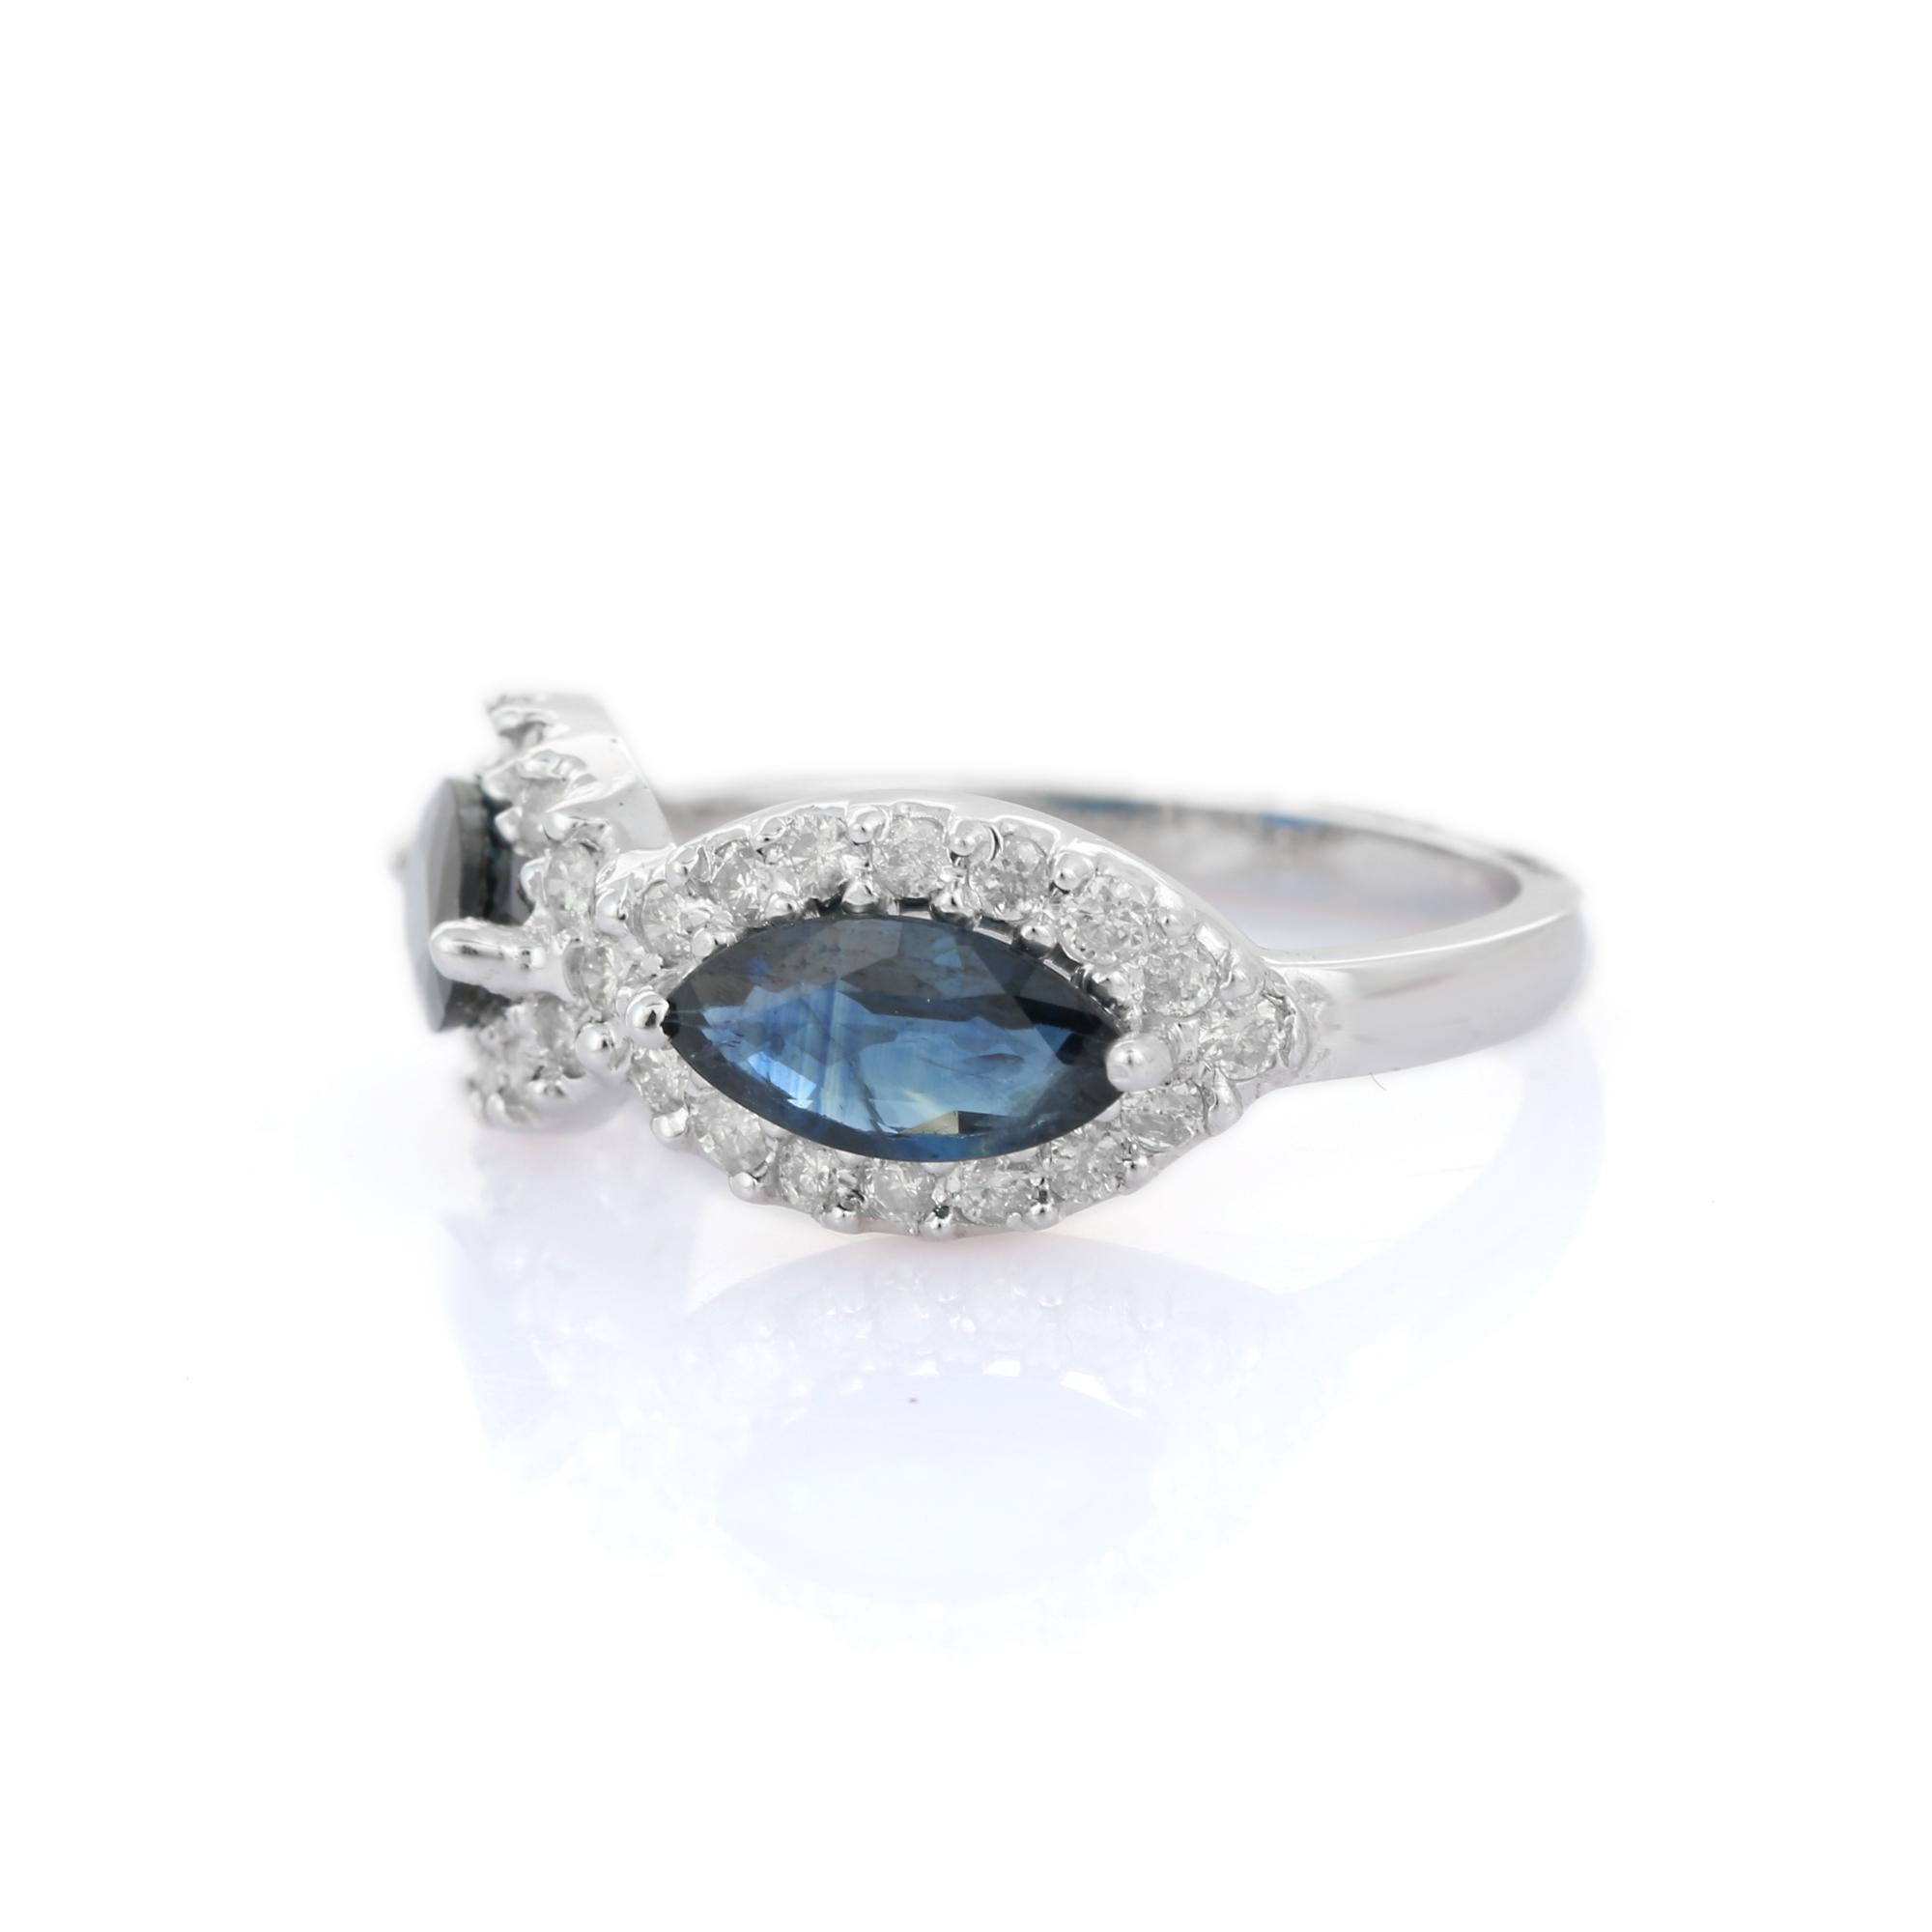 For Sale:  Women's Estate Marquise Blue Sapphire Diamond Ring in Solid 14k White Gold 4